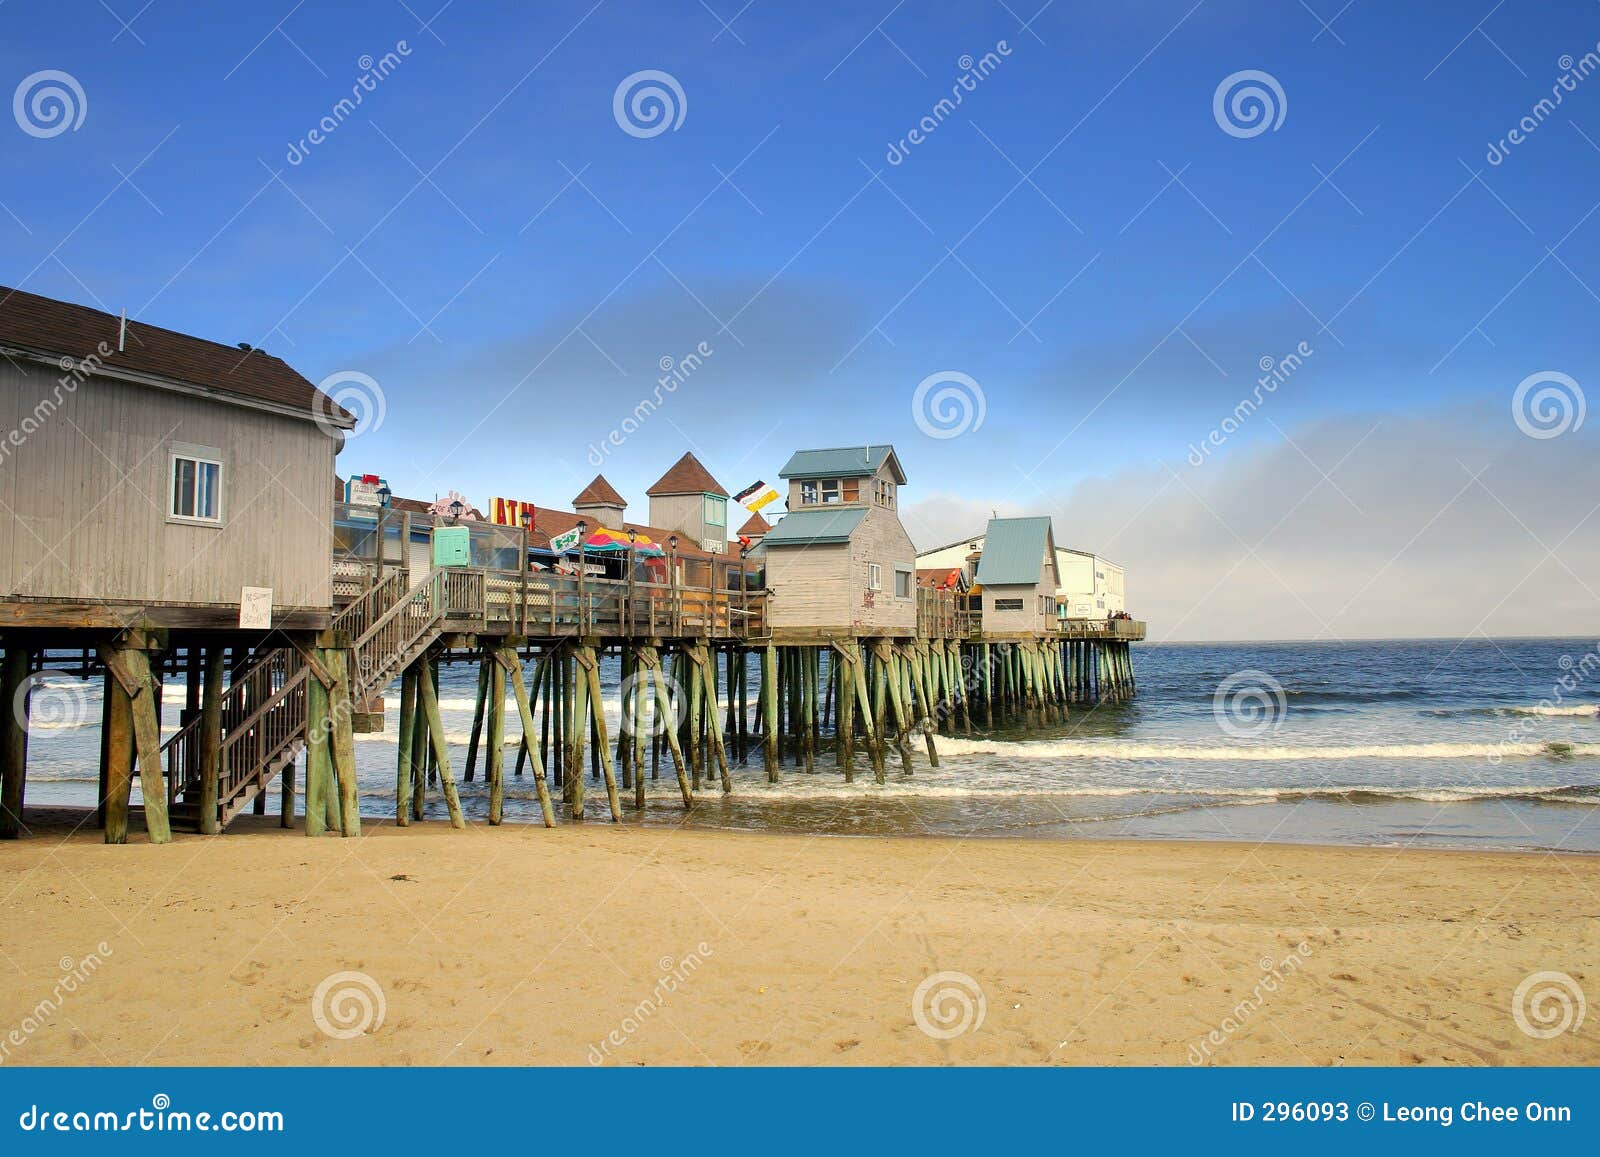 Old Orchard Beach, Maine stock image pic